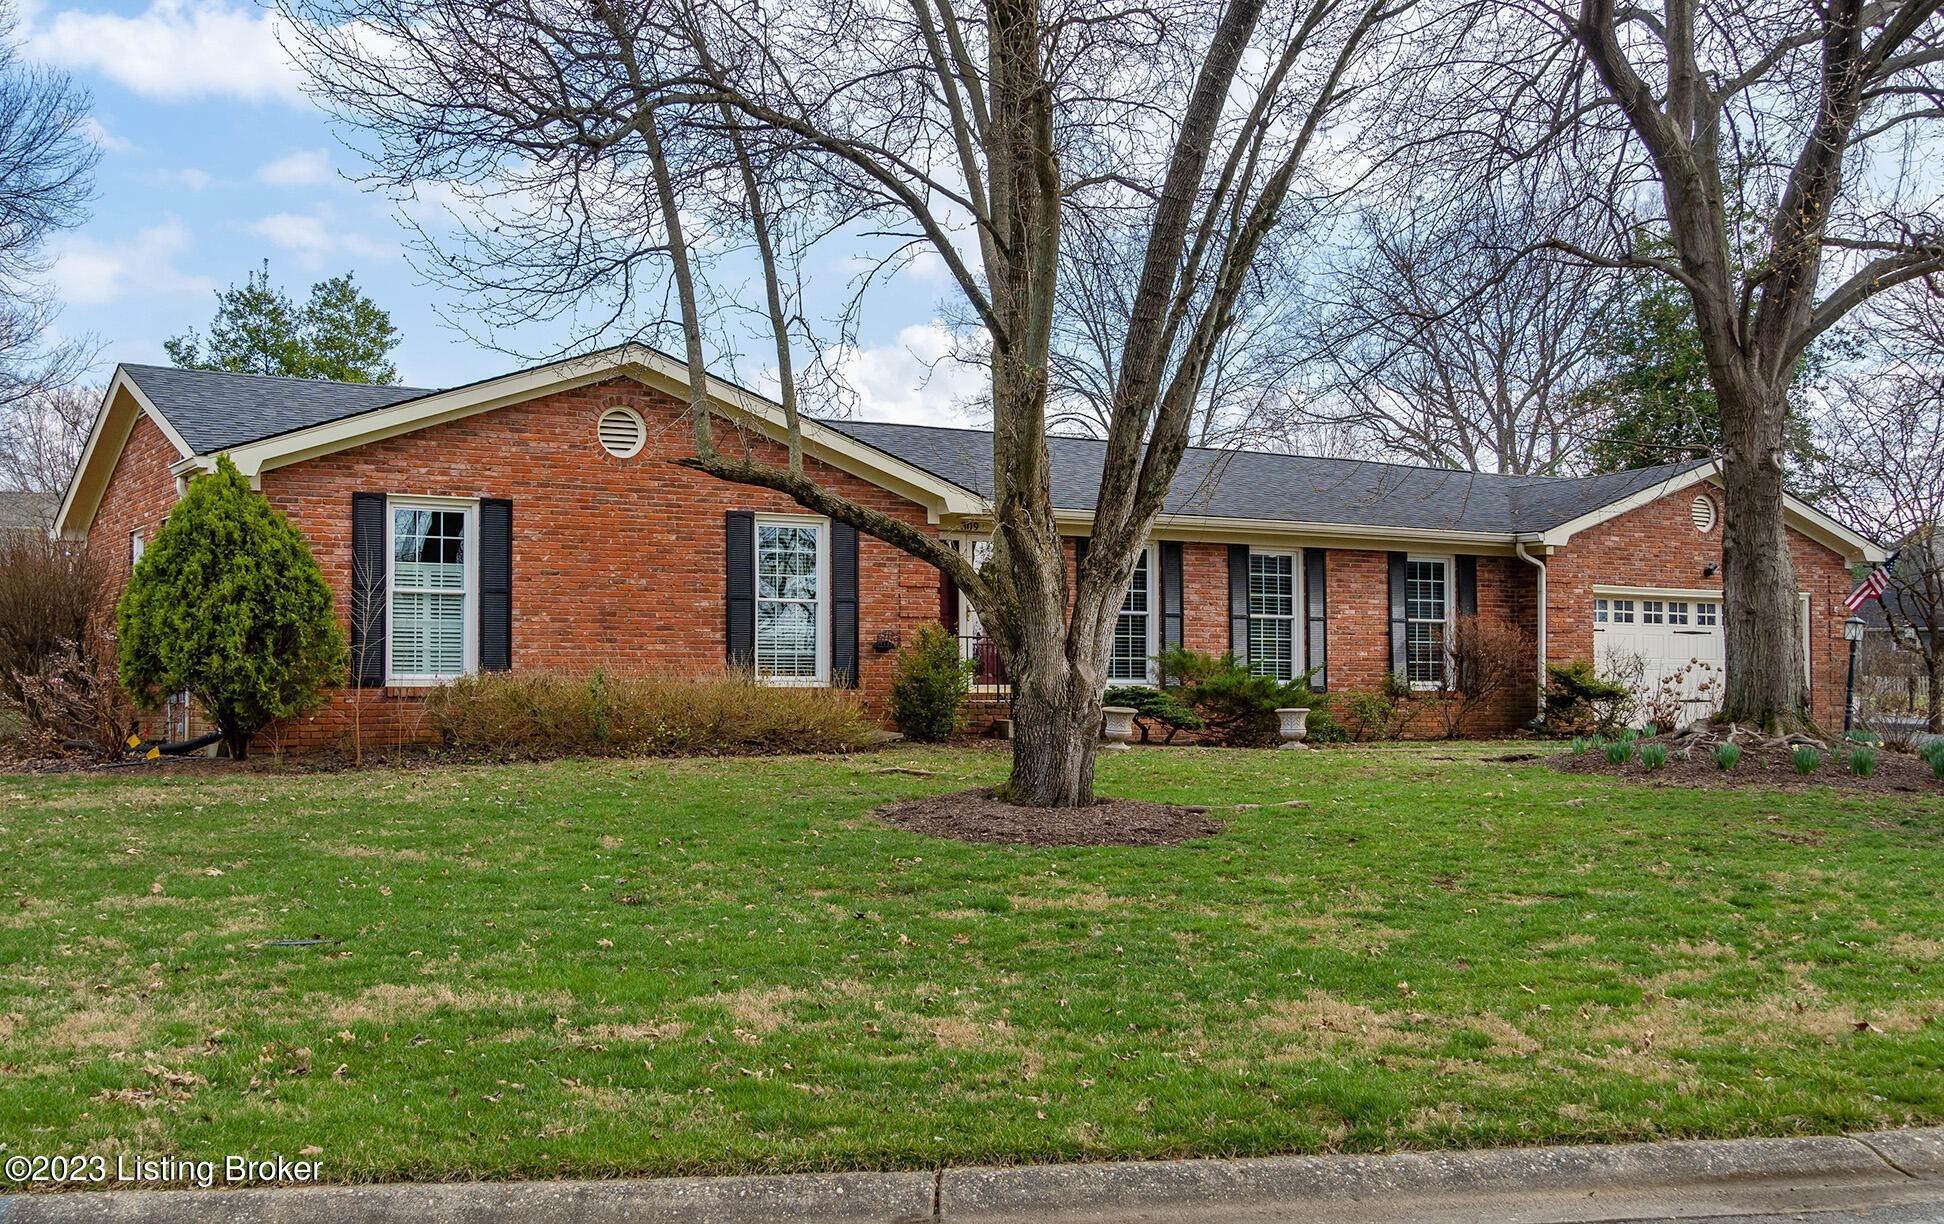 8. Single Family at Louisville, KY 40222